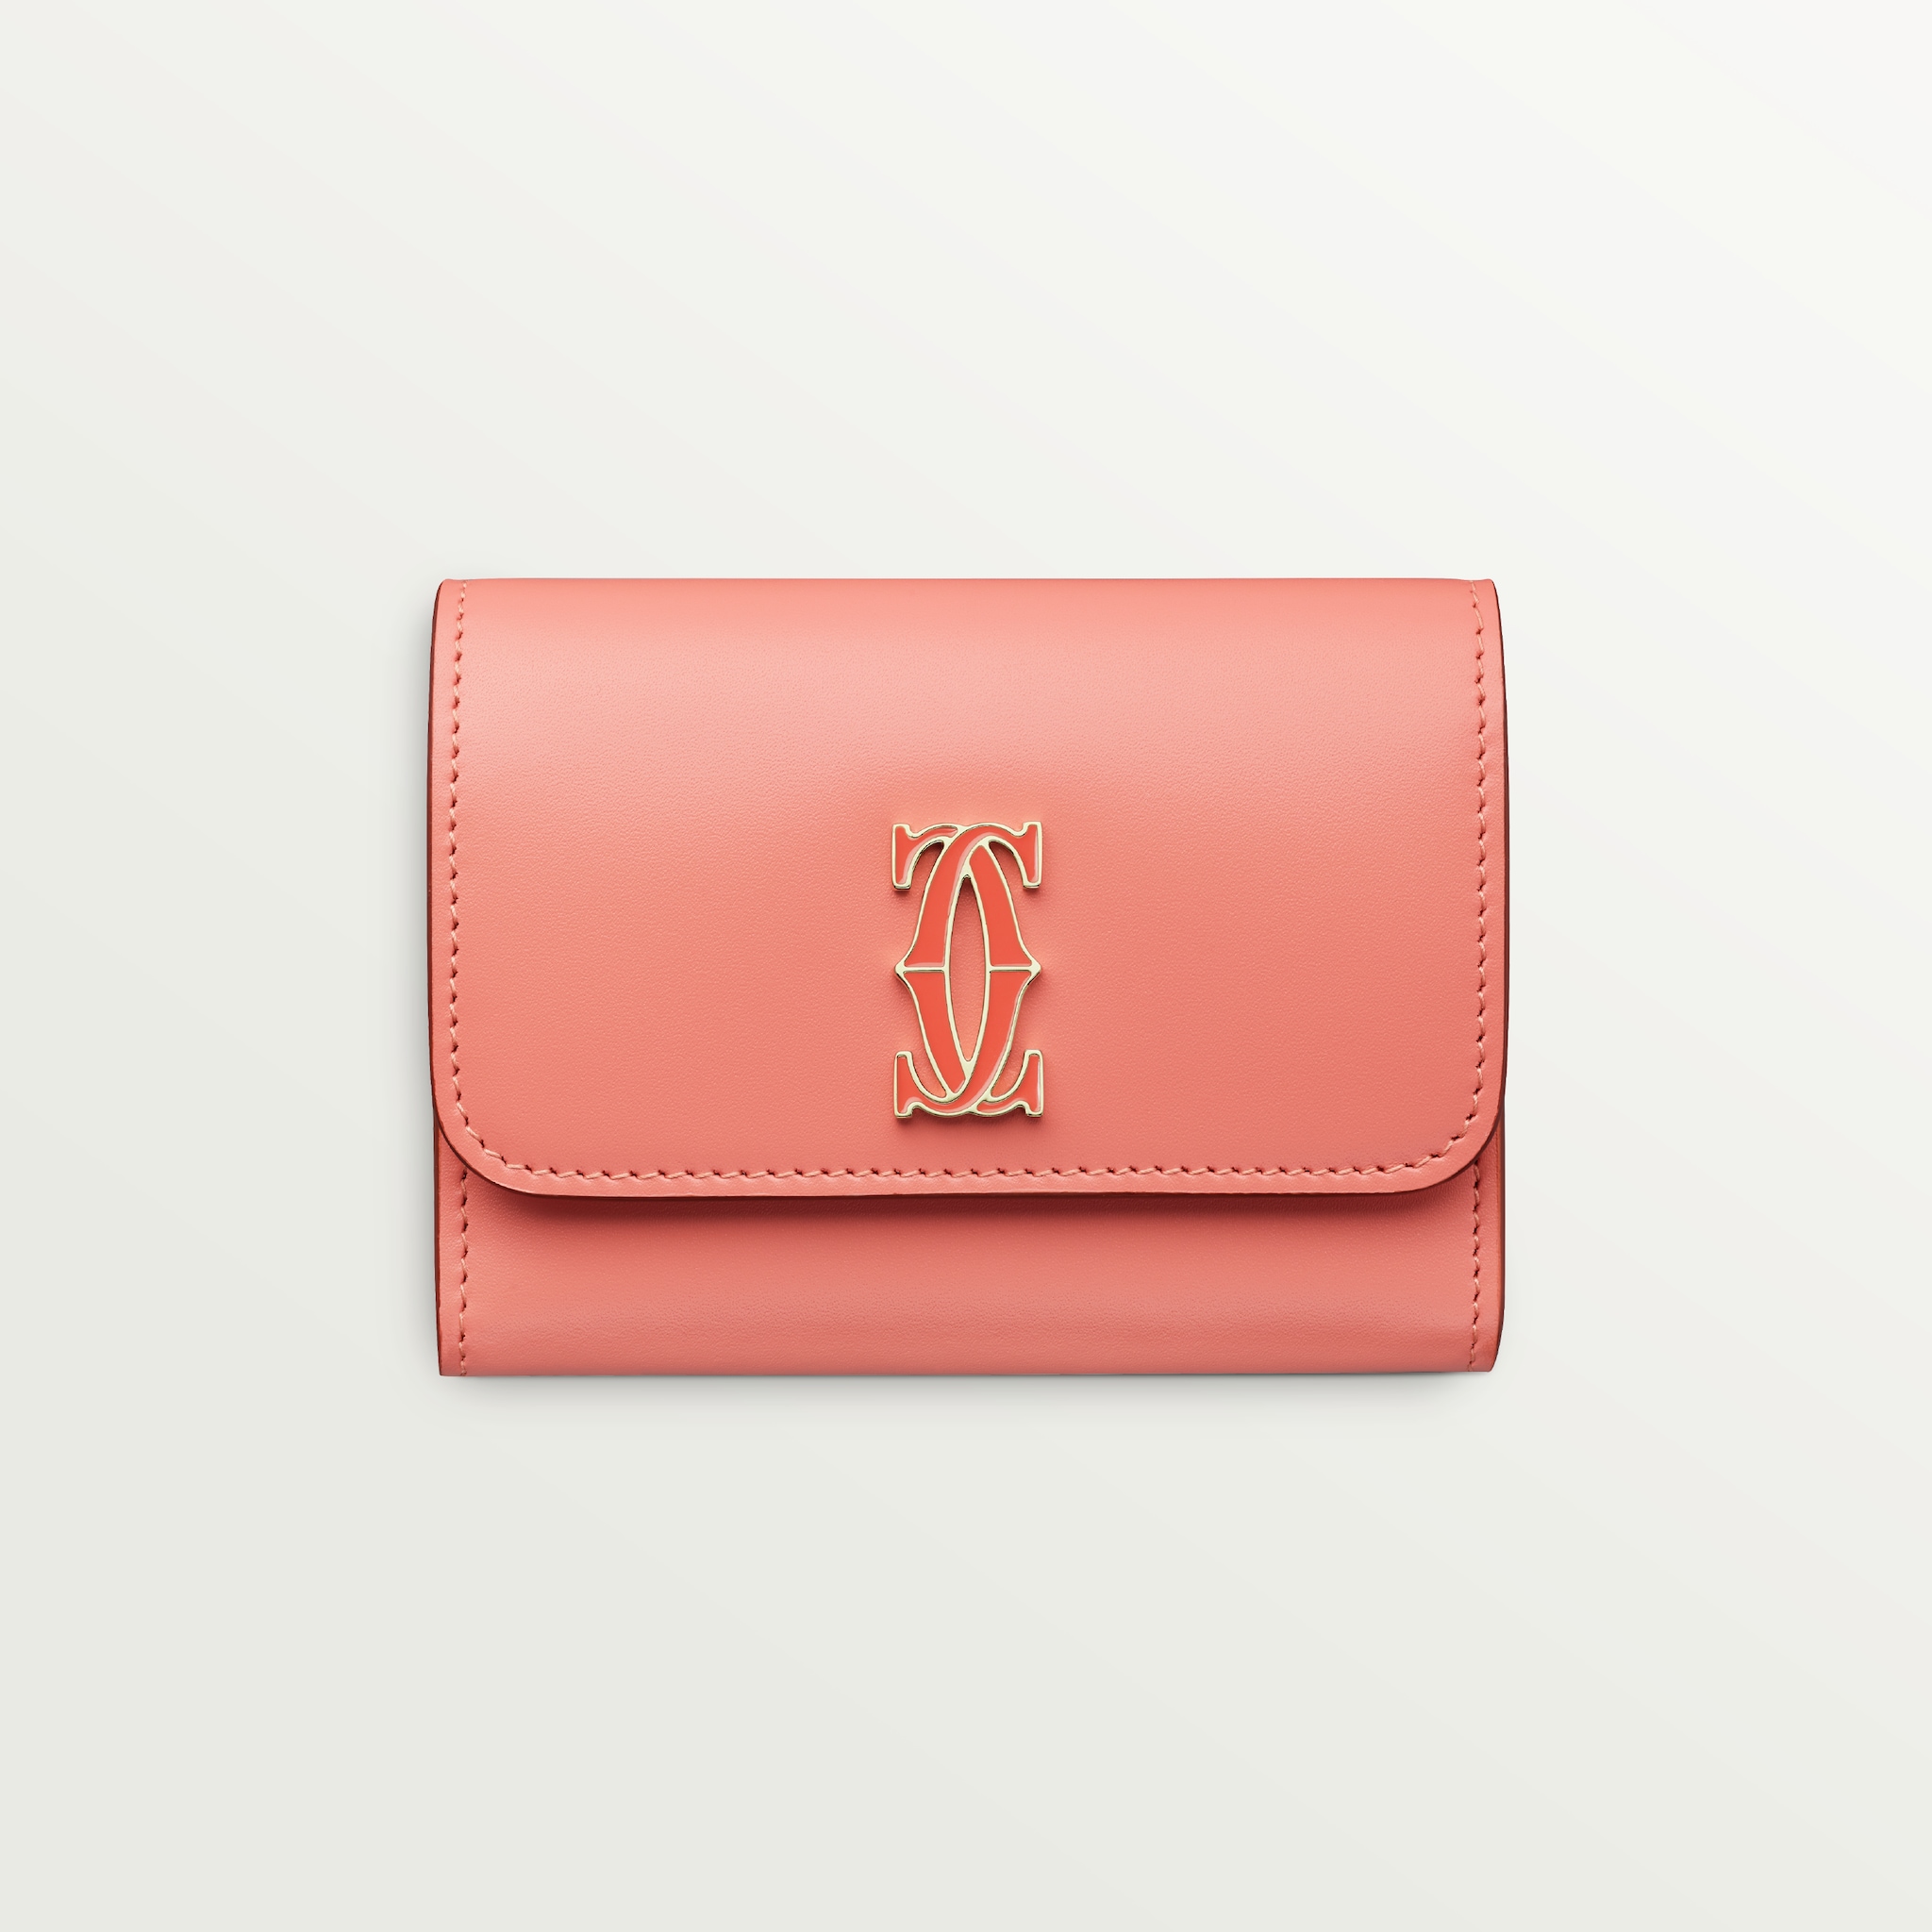 C de Cartier Small Leather Goods, WalletTwo-tone coral/light coral calfskin, golden finish and coral/light coral enamel